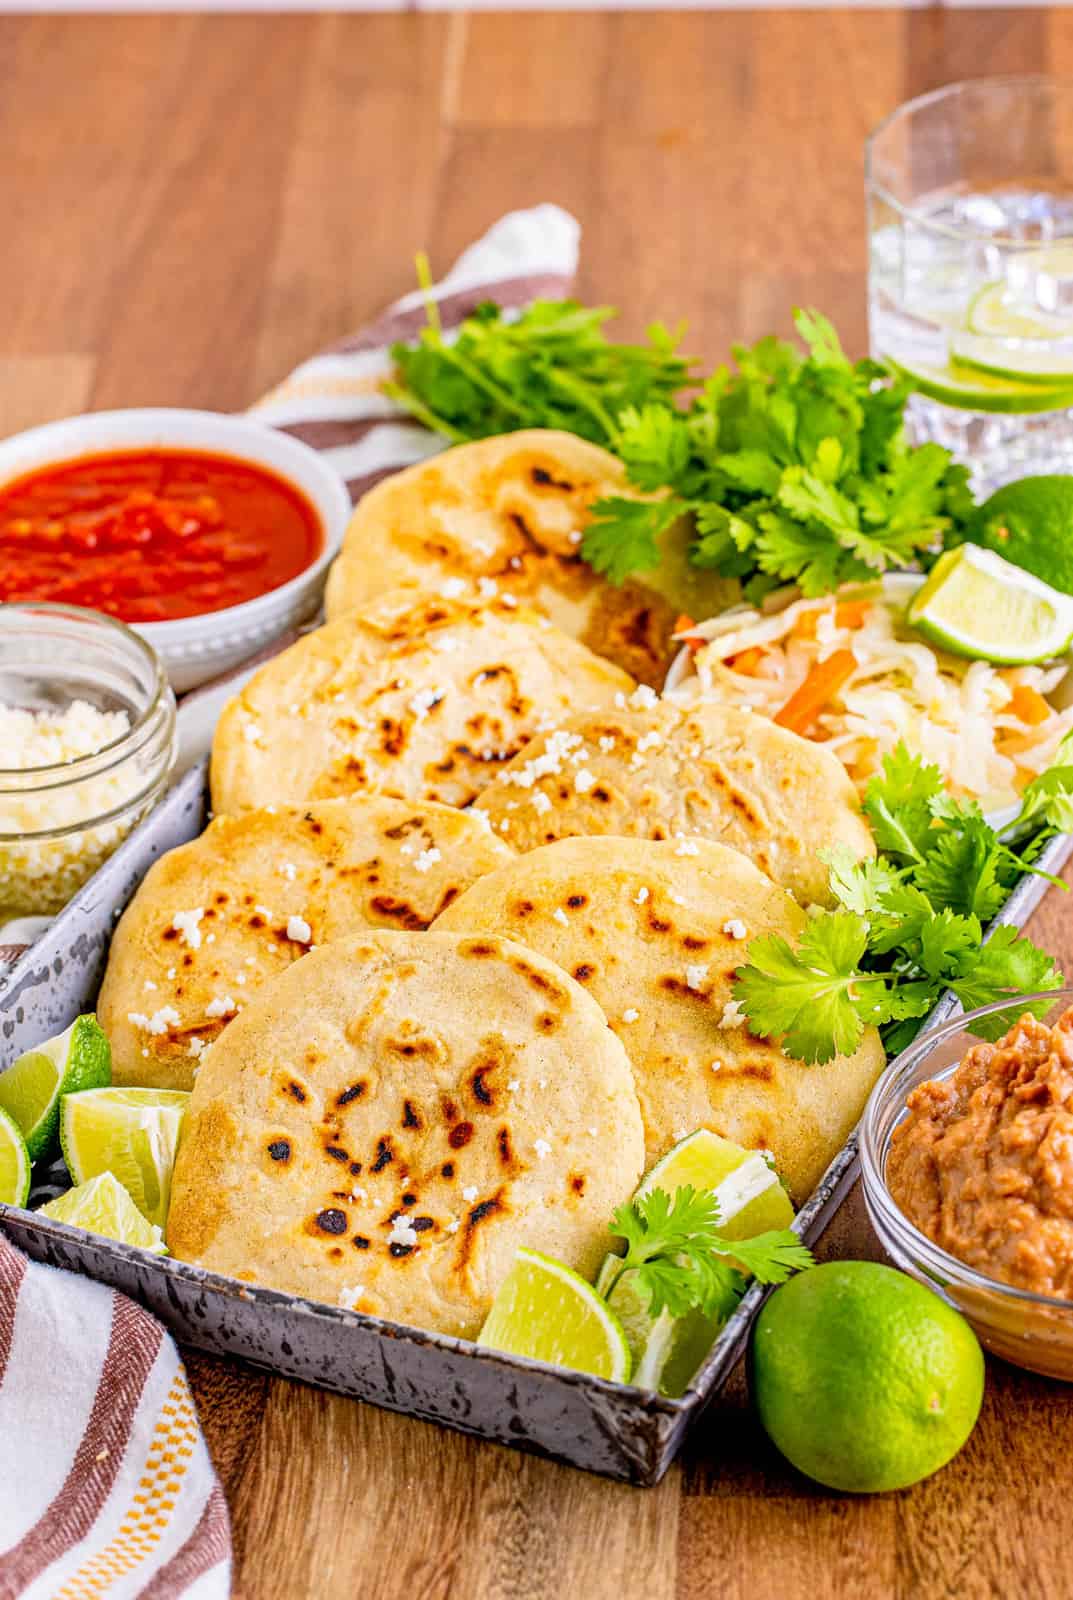 Pupusas Recipe layered with garnishes and dipping sauces.